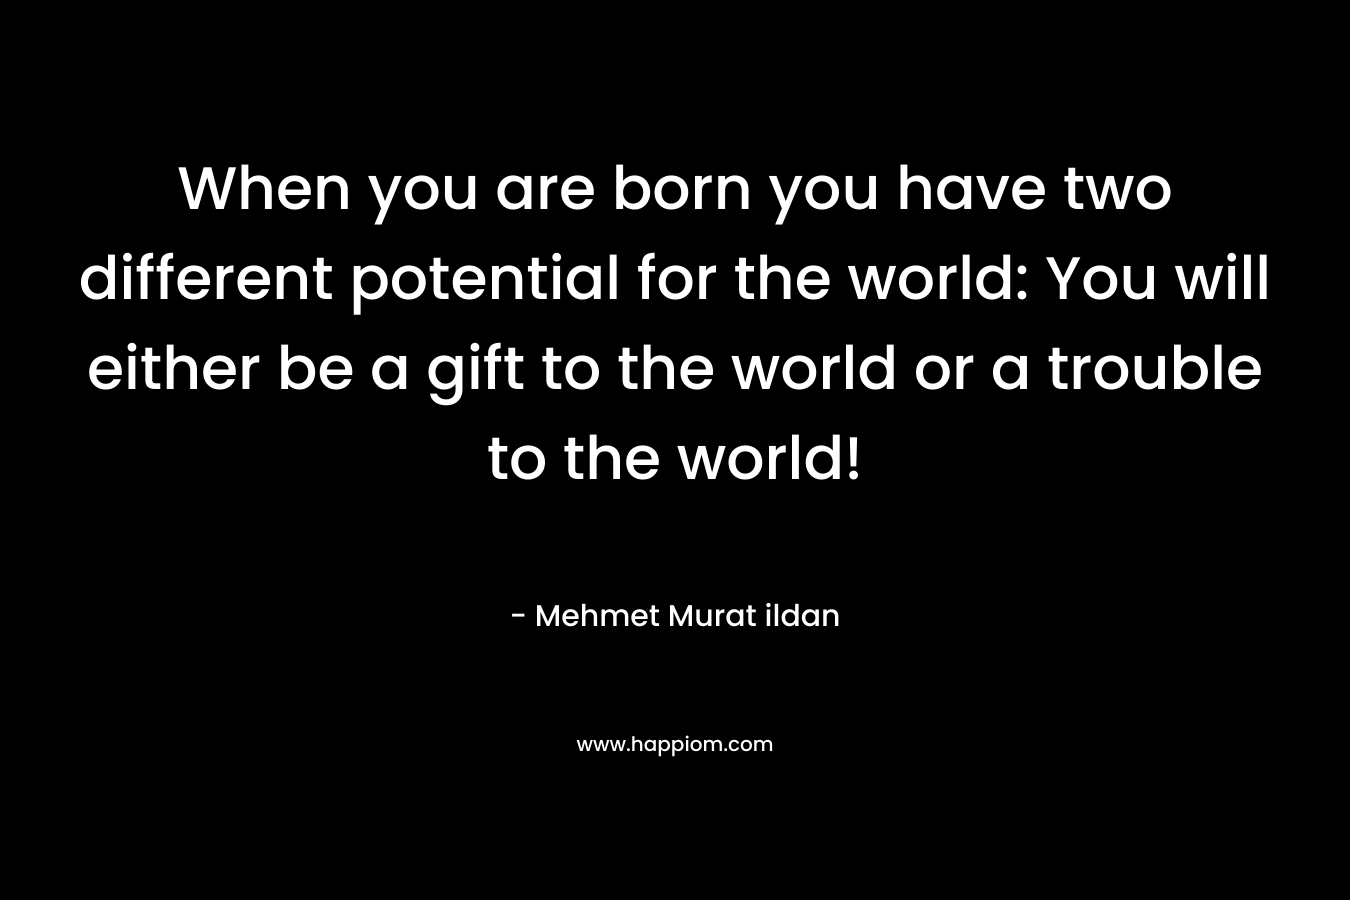 When you are born you have two different potential for the world: You will either be a gift to the world or a trouble to the world!